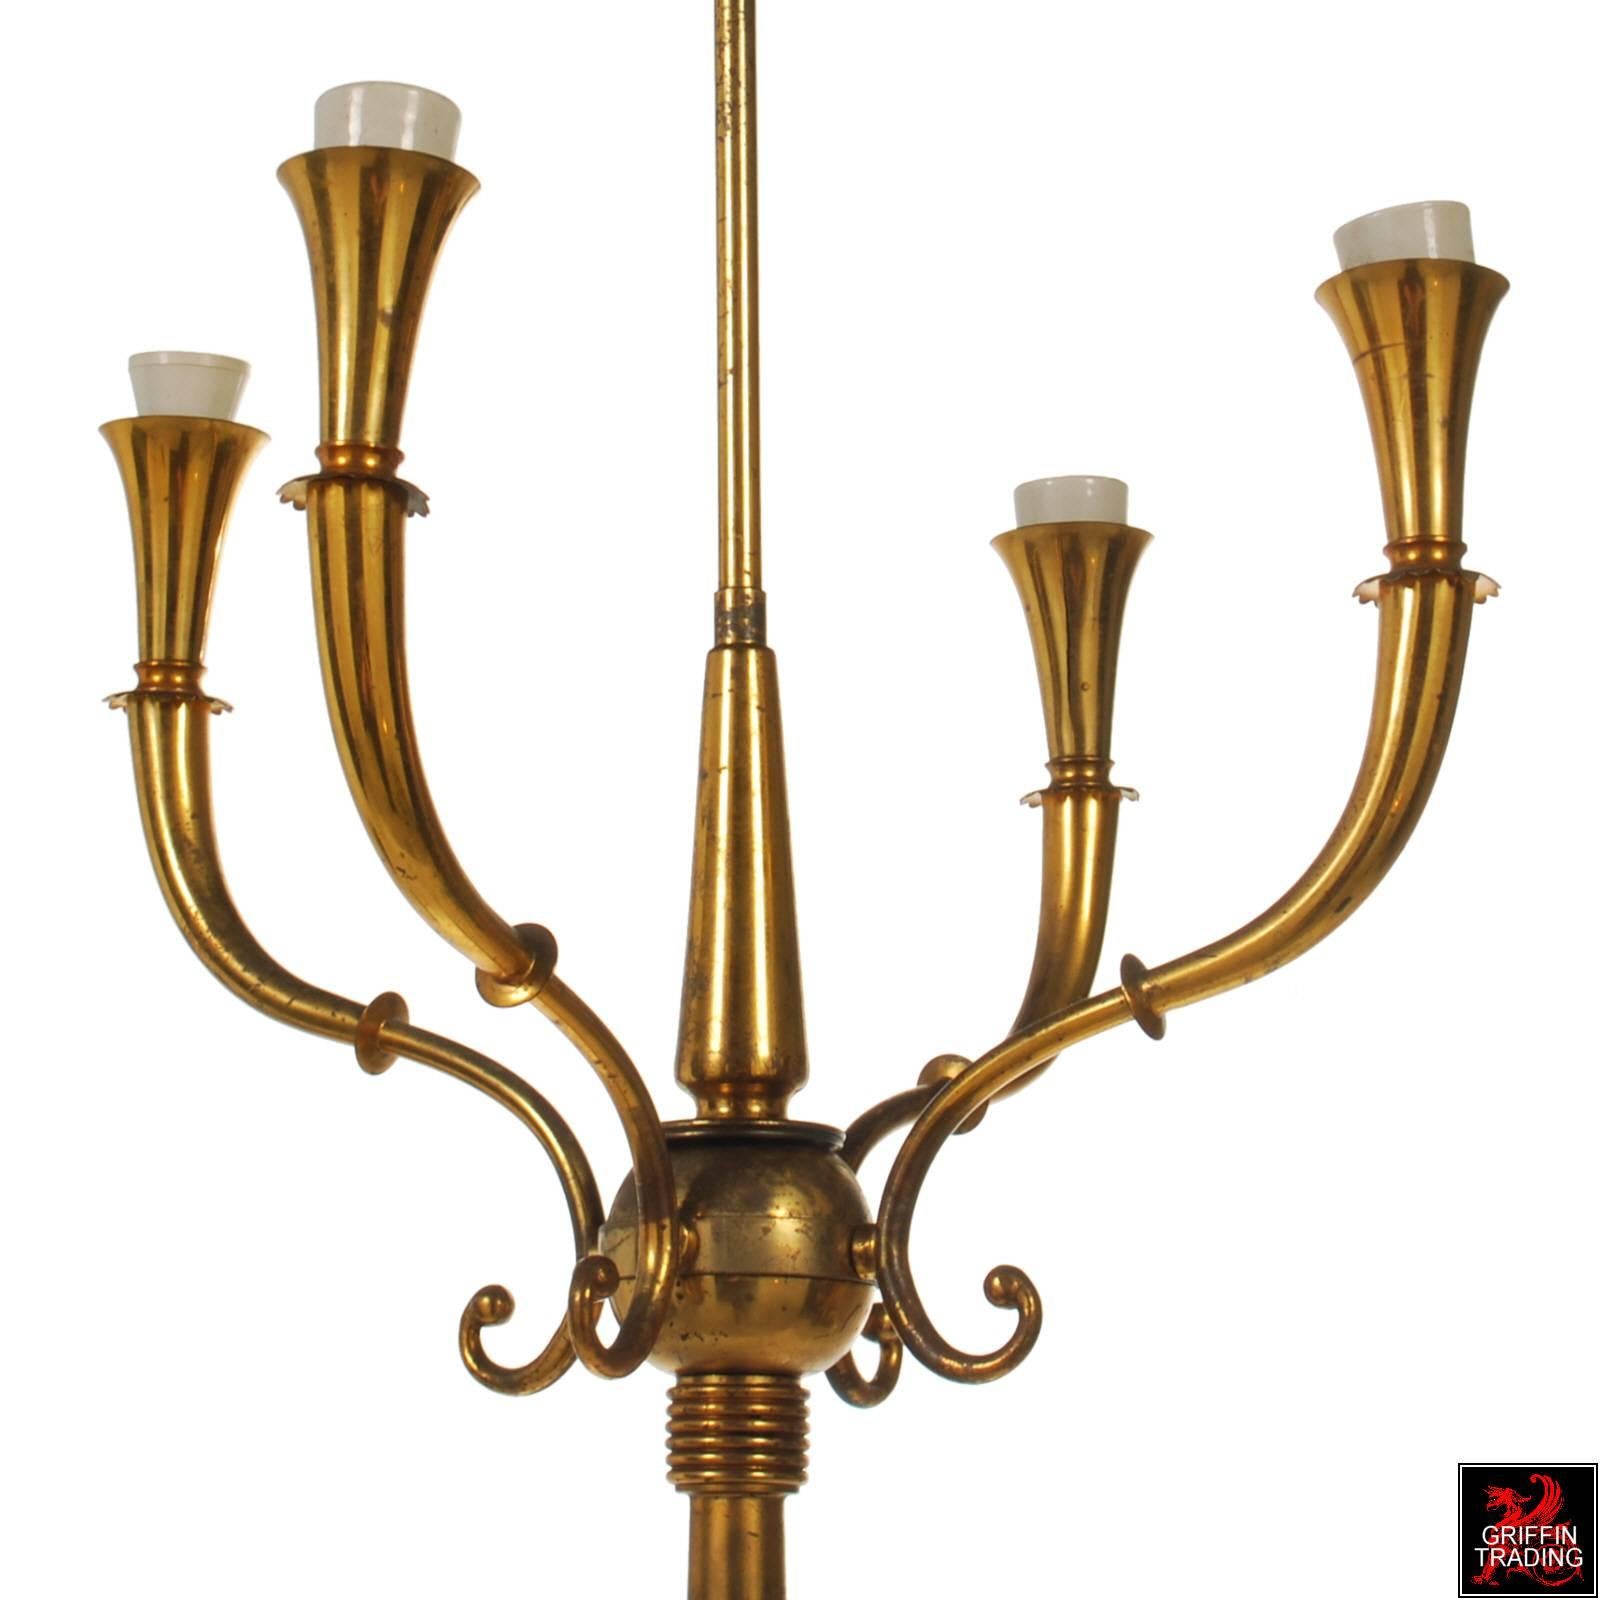 Stylish Italian Brass Floor Lamp with Four Lights In Good Condition For Sale In Dallas, TX